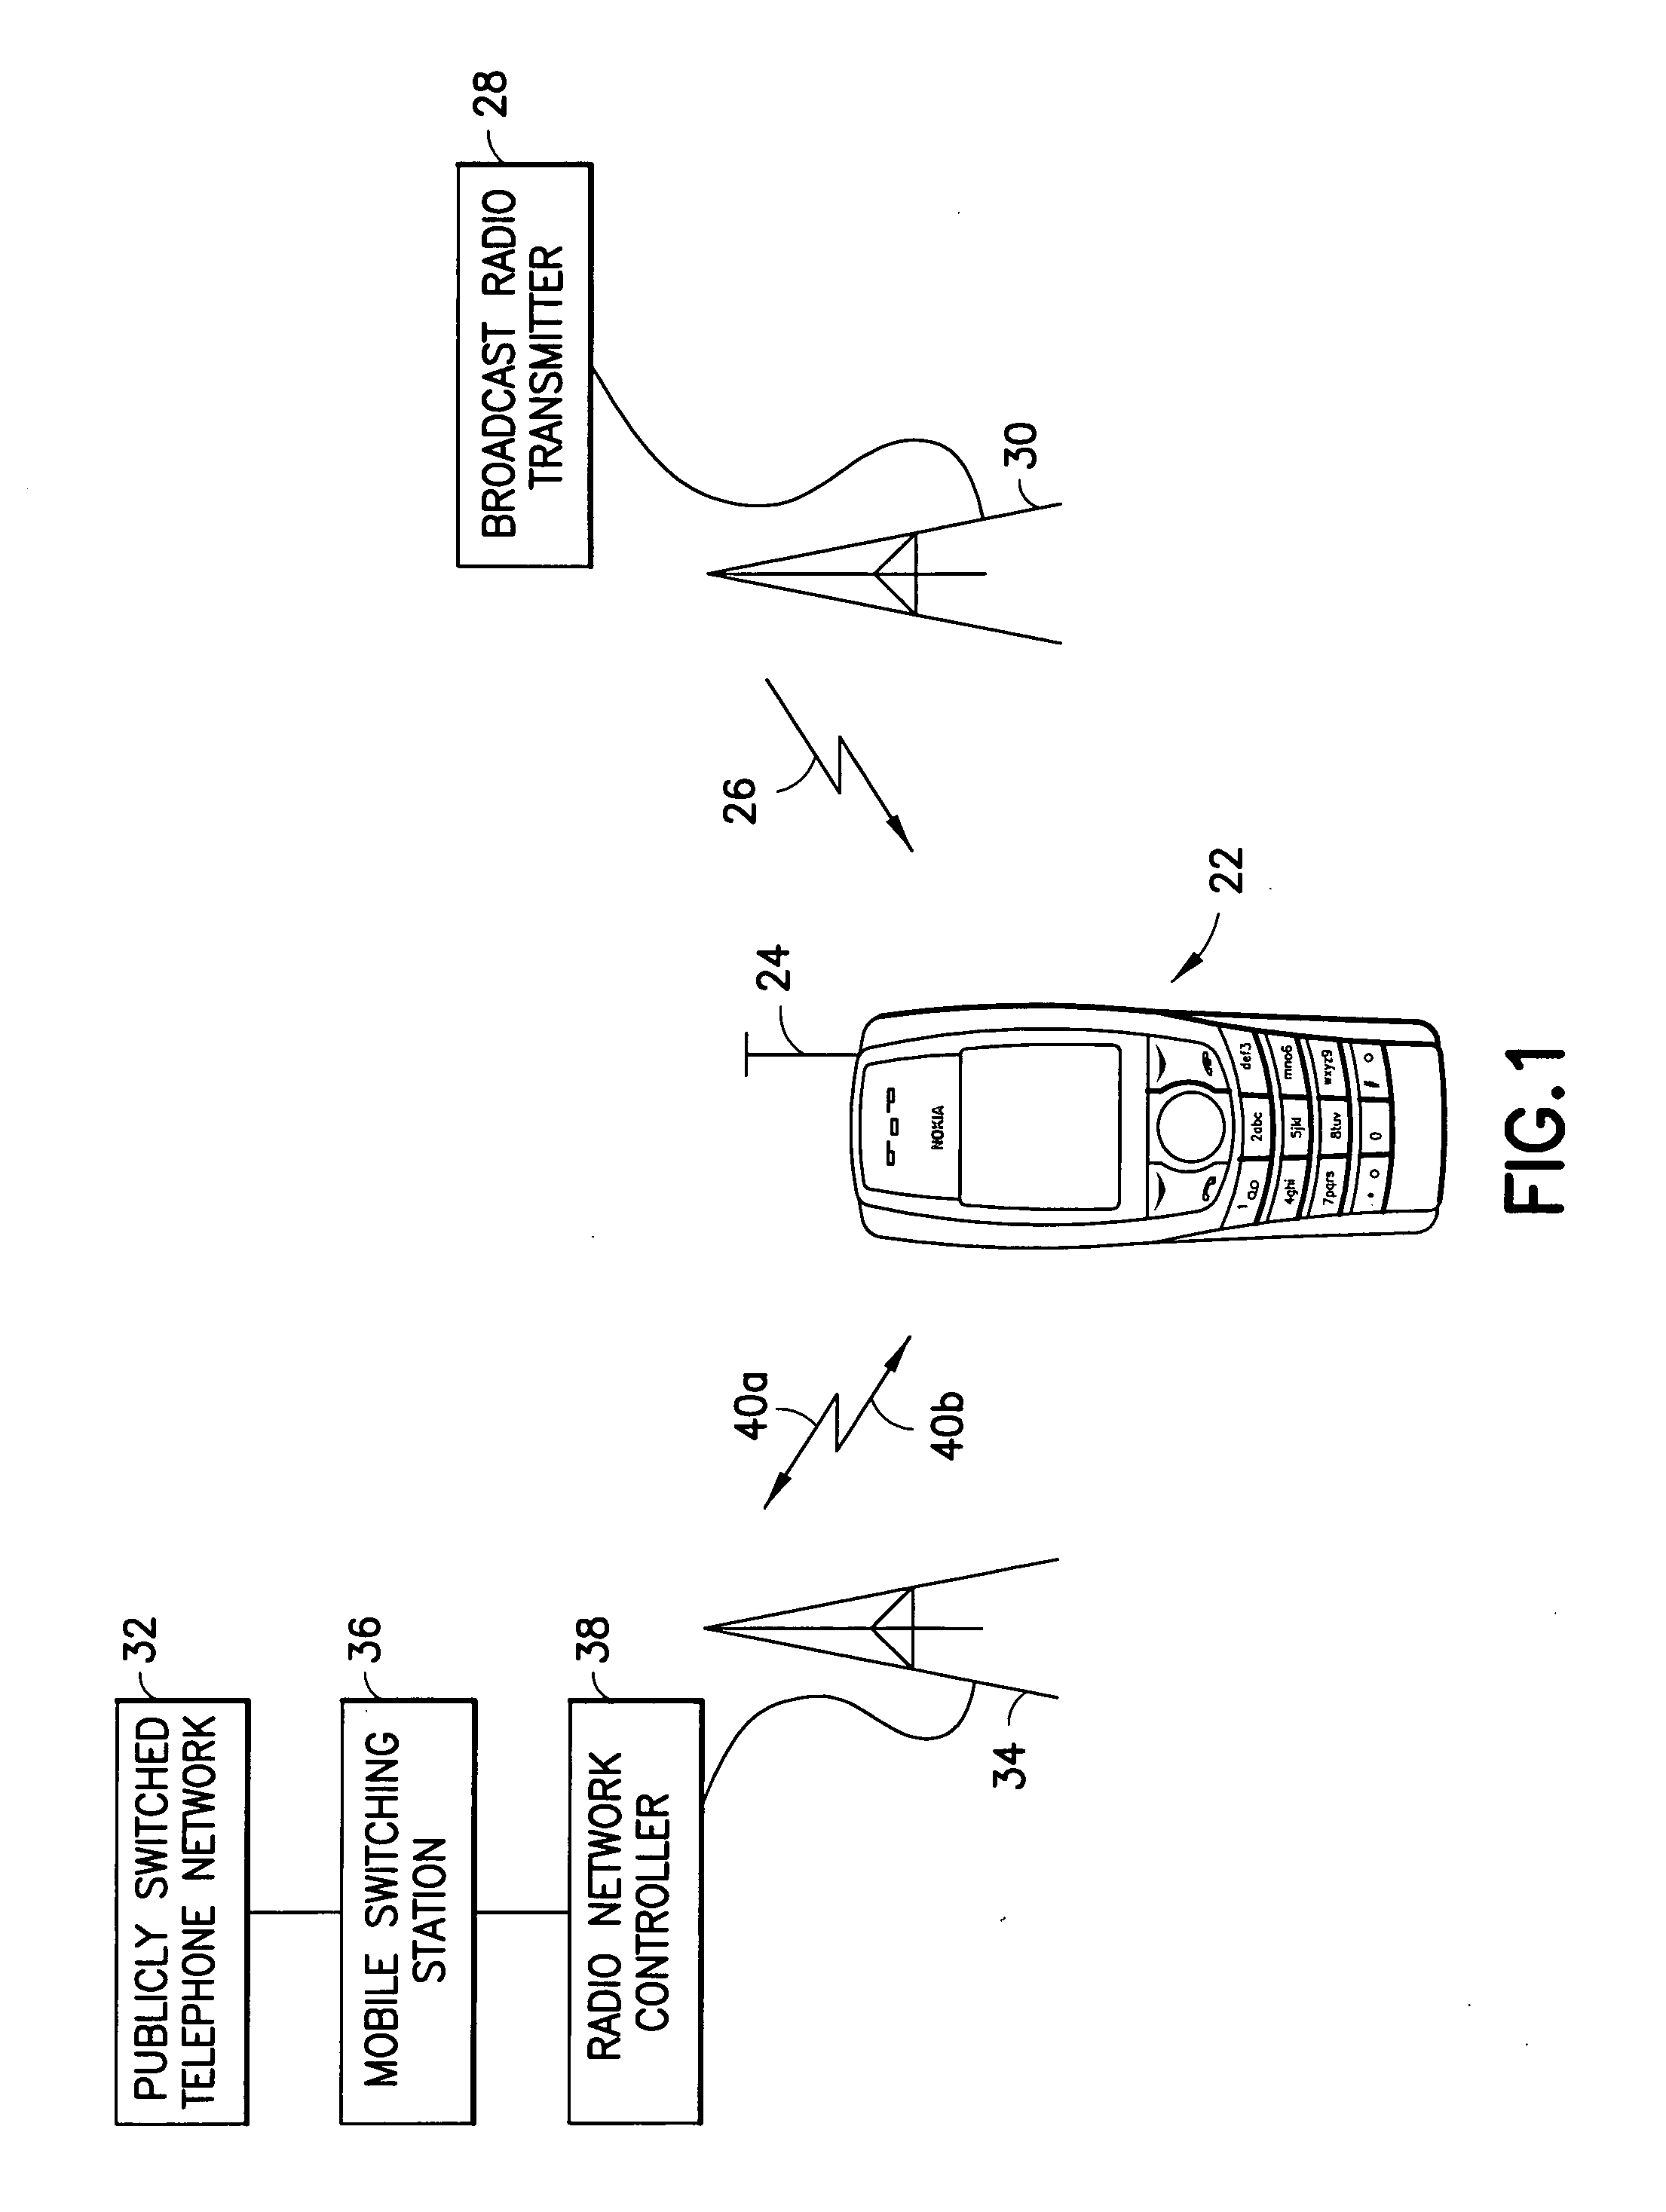 Built-in whip antenna for a portable radio device